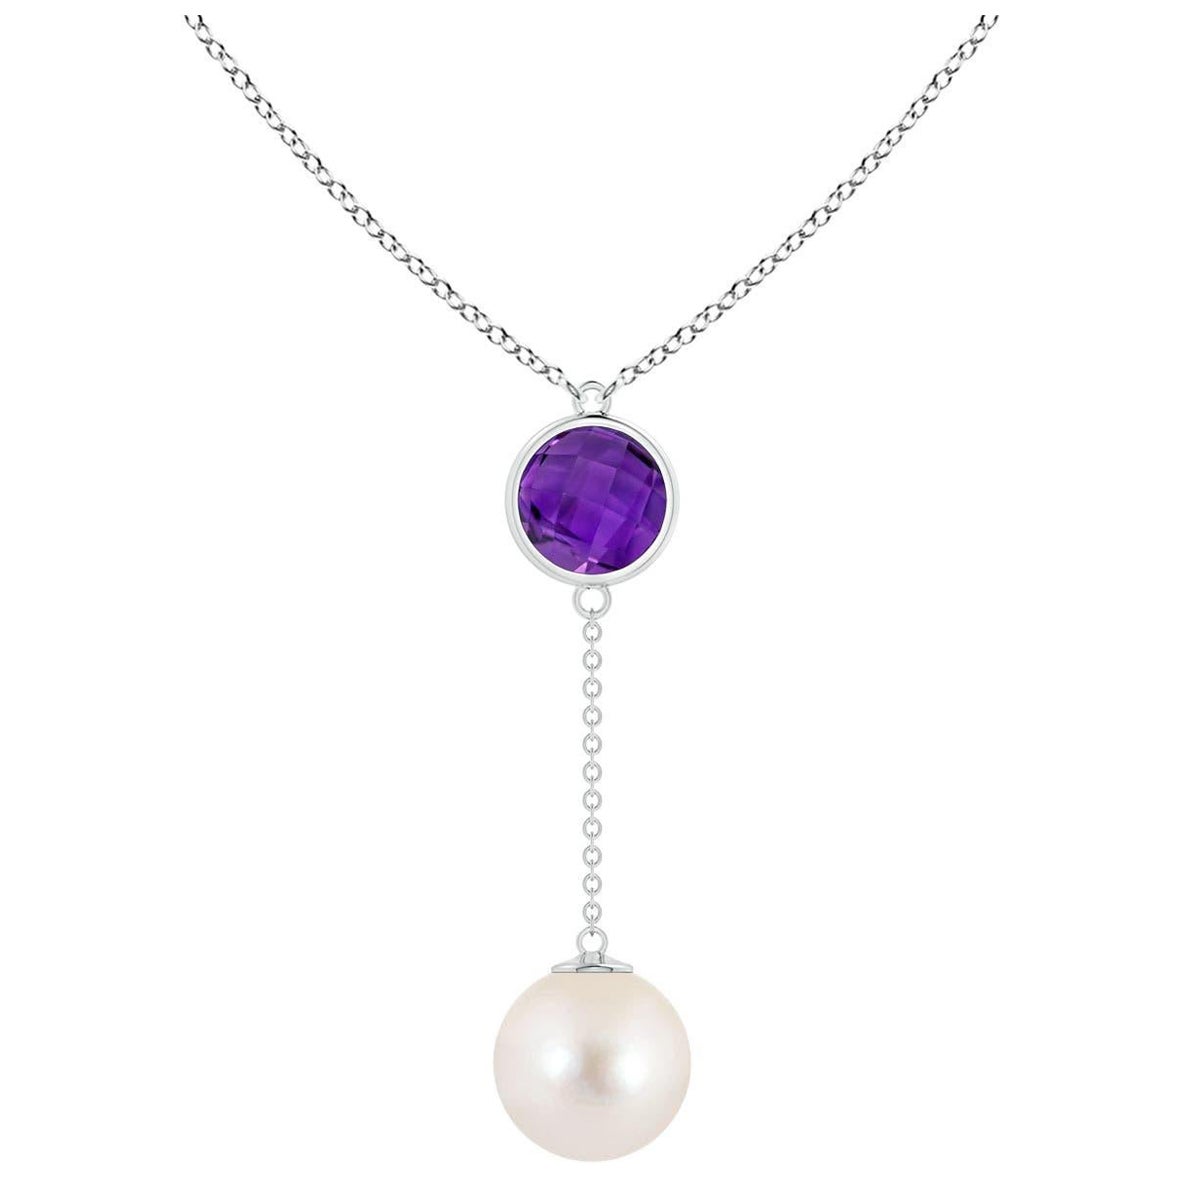 Freshwater Cultured Pearl & 1.65ct Amethyst Lariat Necklace in 14K White Gold For Sale